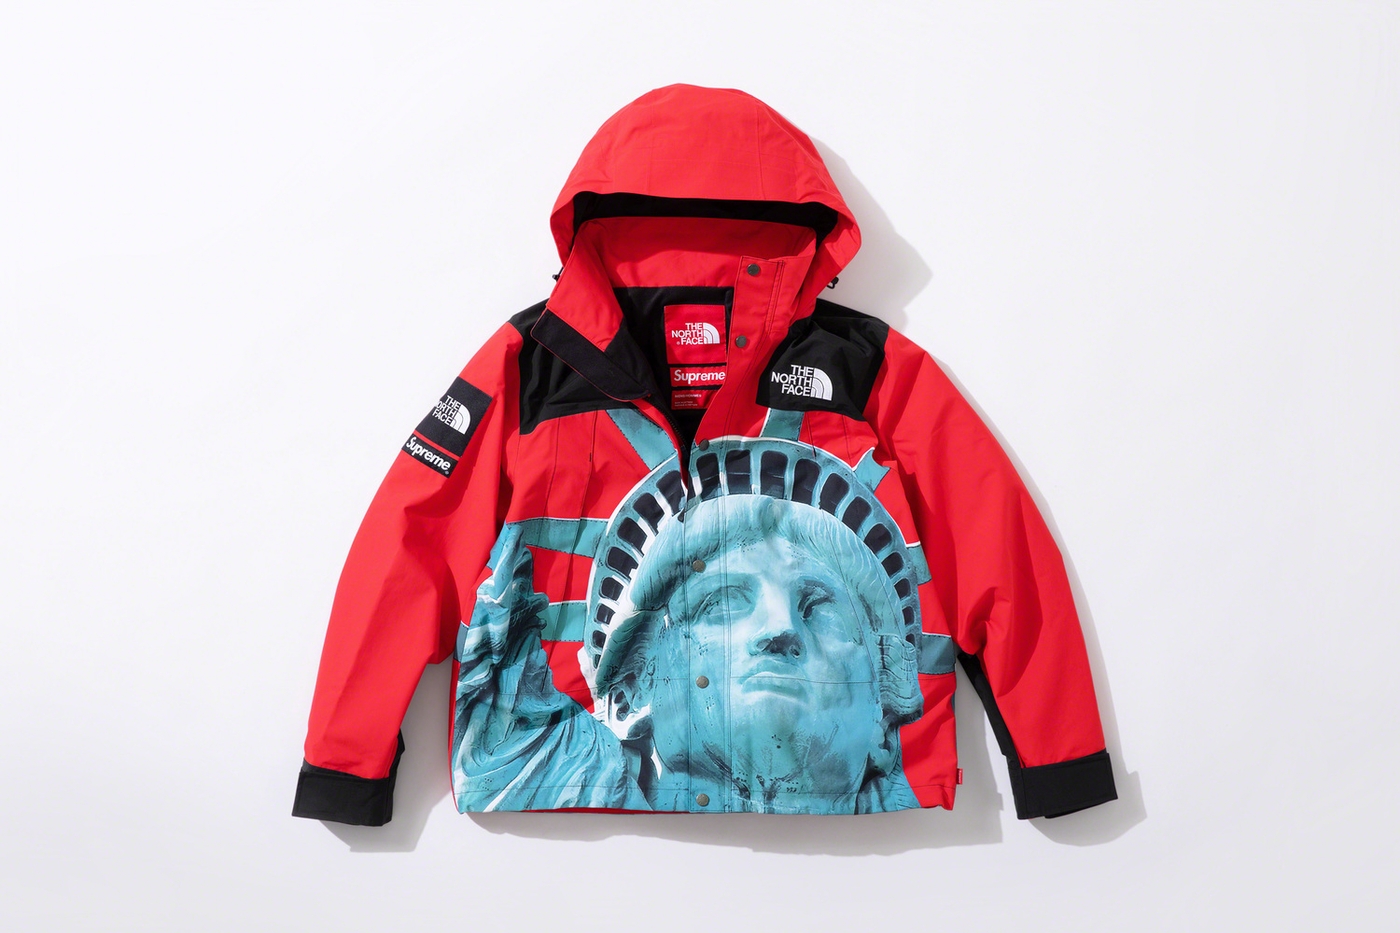 Statue of Liberty Mountain Jacket with packable hood. (15/29)